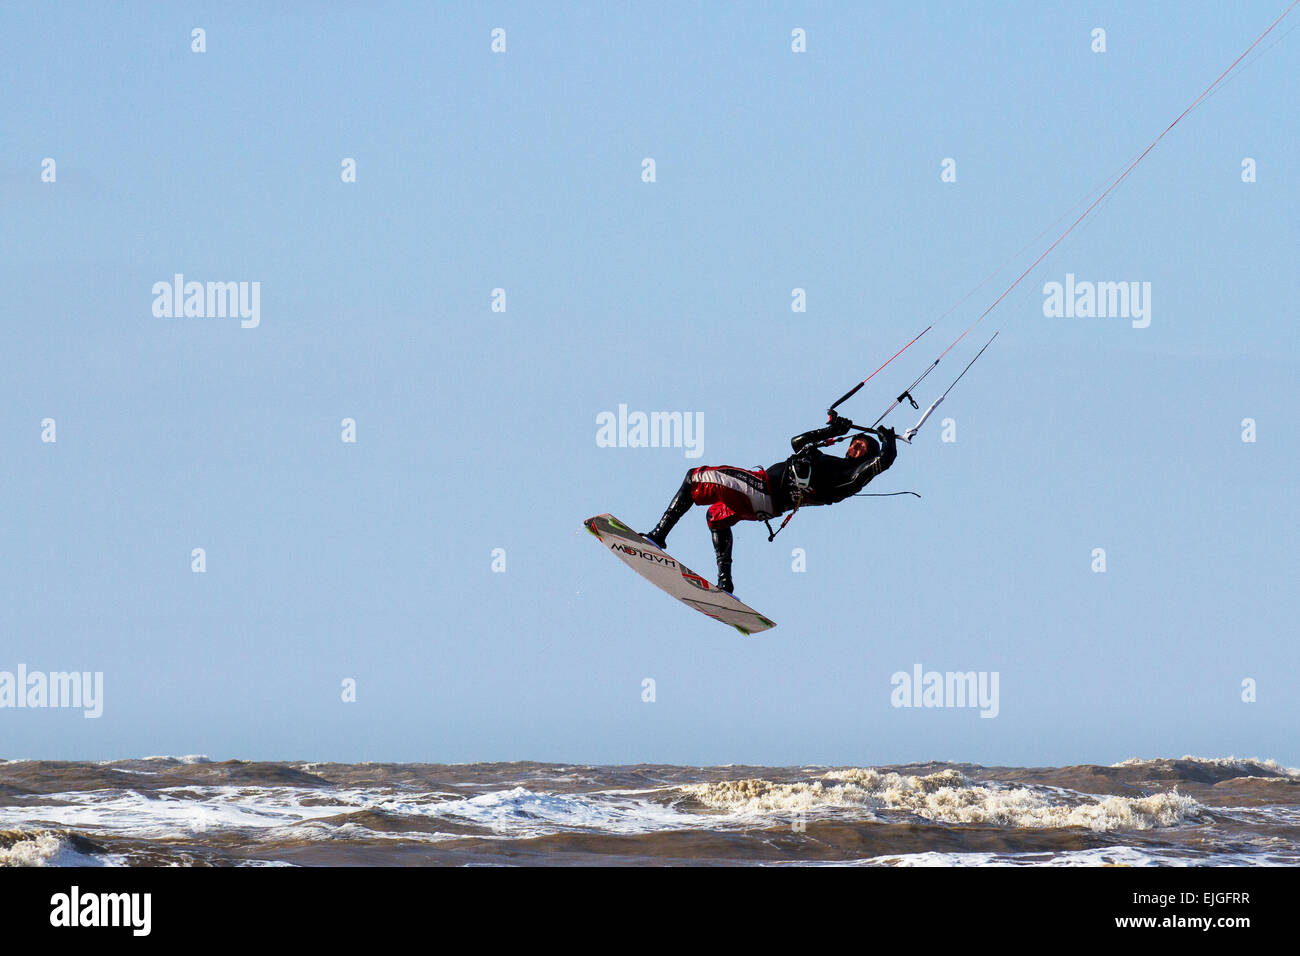 Ainsdale, Southport, Merseyside, UK 26th March, 2015.  UK Weather at beach Kite Surfing zone Ainsdale-on-Sea with  High Tides & High Winds.  A kiteboarder harnessing the power of the strong wind with a large controllable power kite propelled across the incoming tide, on a kiteboard.  Sefton Council are now issuing permits for use of Kitesurfing at Ainsdale Beach. Credit:  Mar Photographics/Alamy Live News Stock Photo